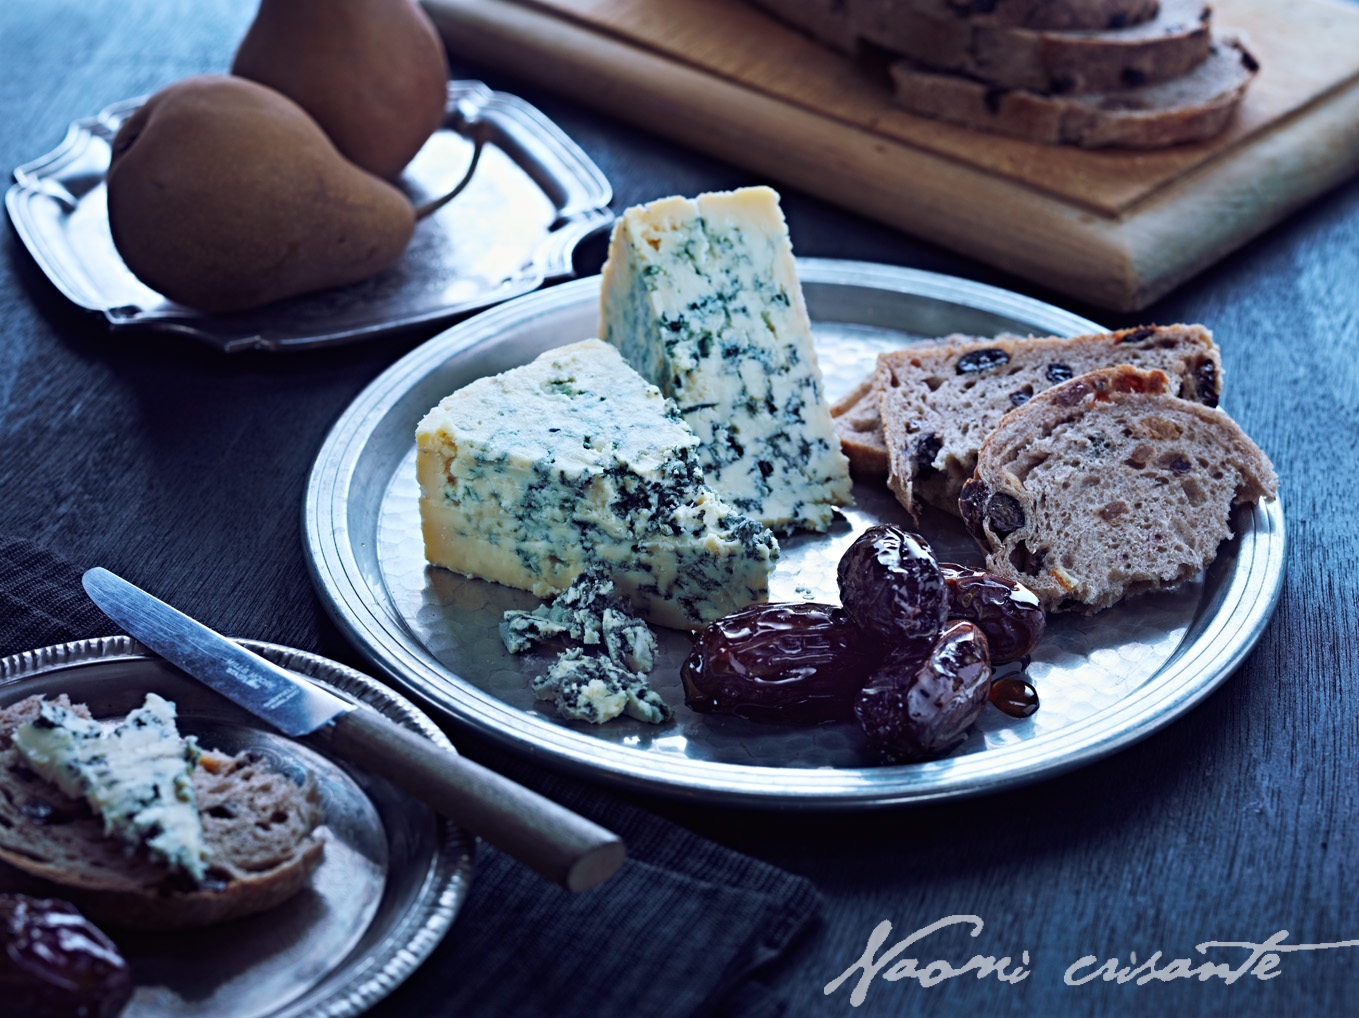 12084879-0176-roaring_40s_blue_with_spriced_dates_and_fruit_bread